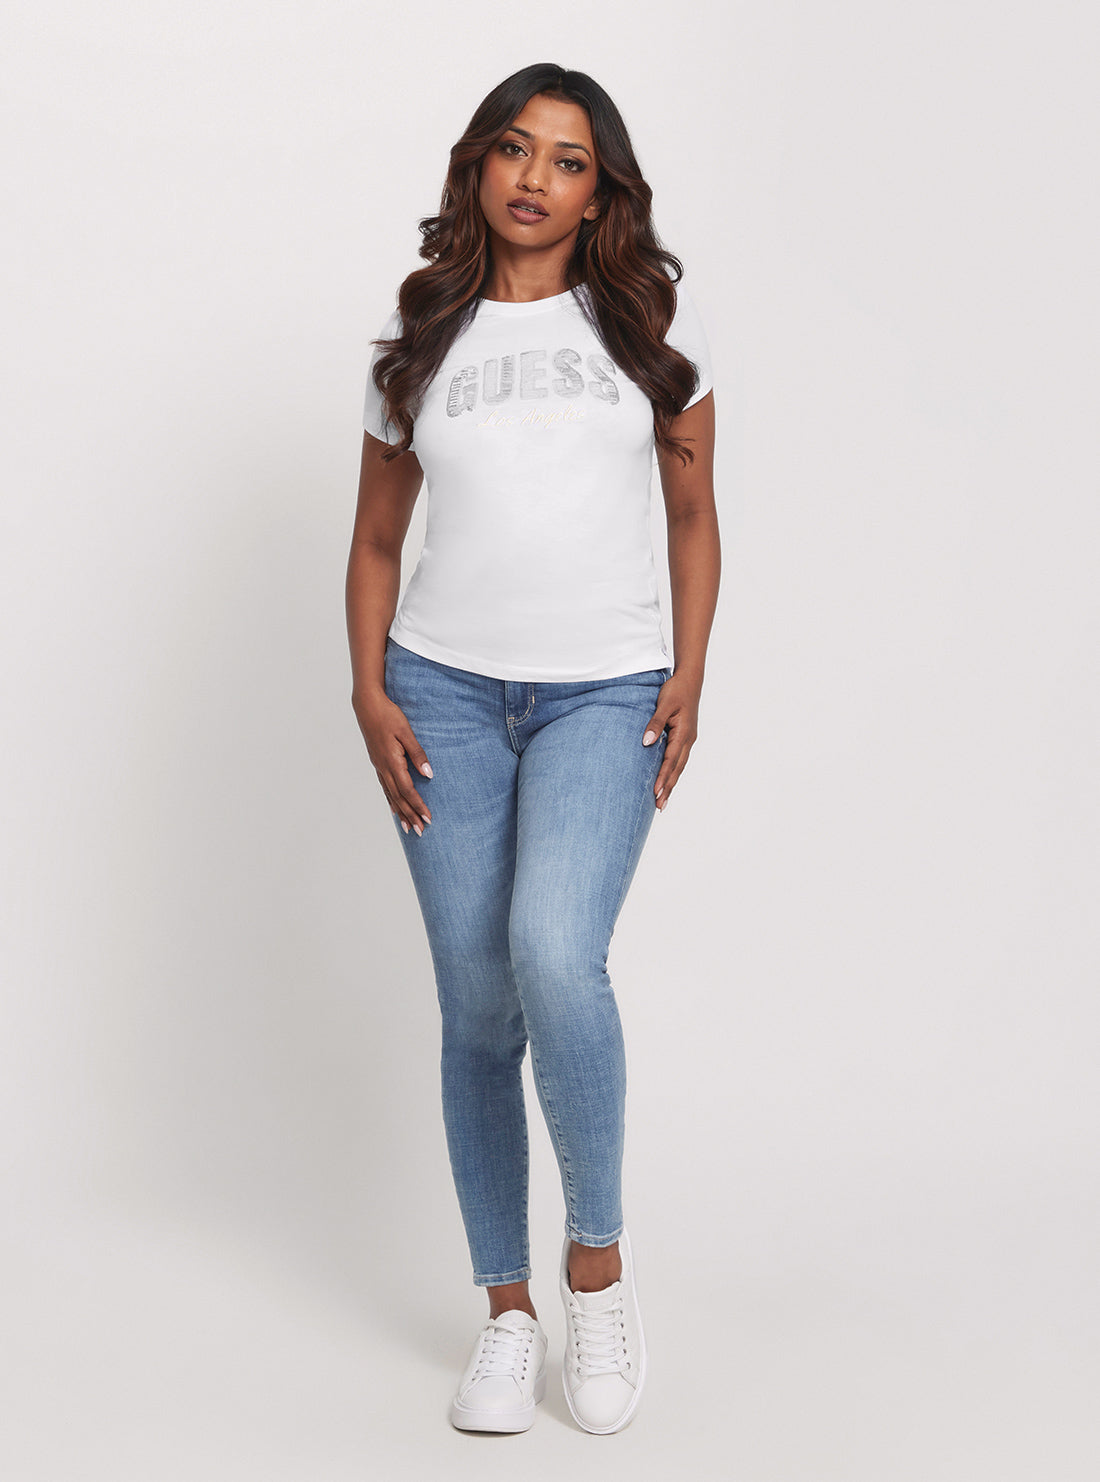 GUESS Eco White Sequins Logo T-Shirt full view